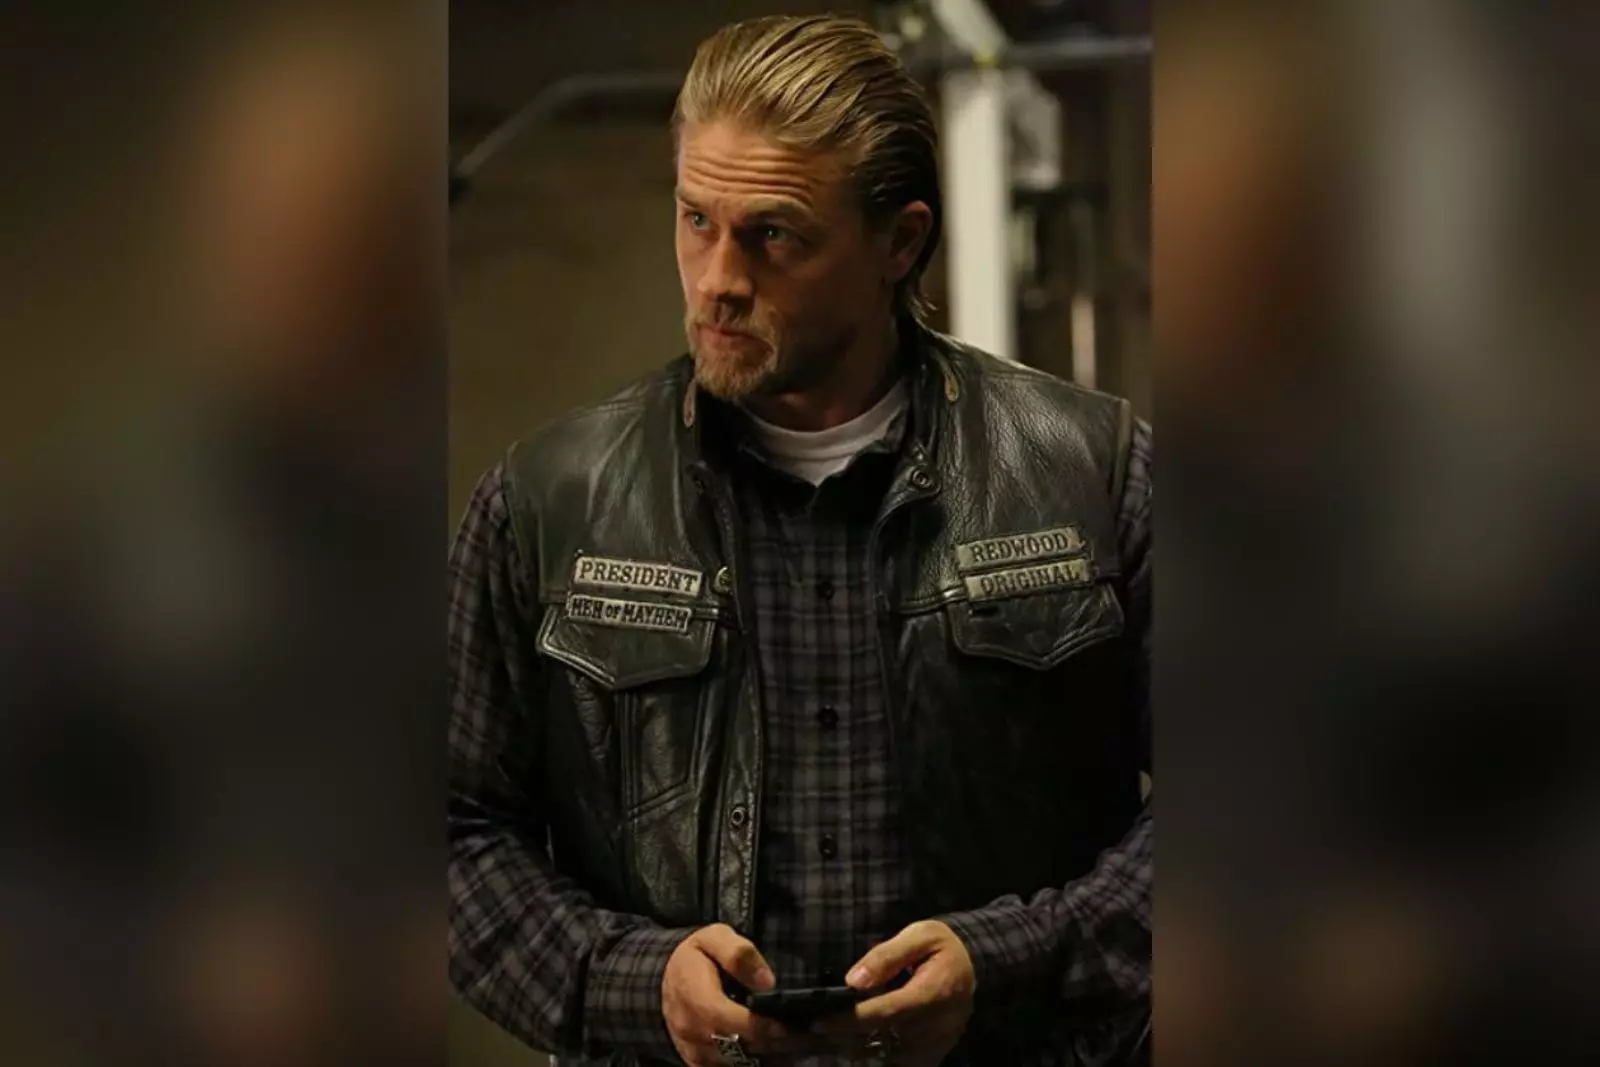 Sons of Anarchy' Cast Reuniting in March in Cherry Hill, NJ